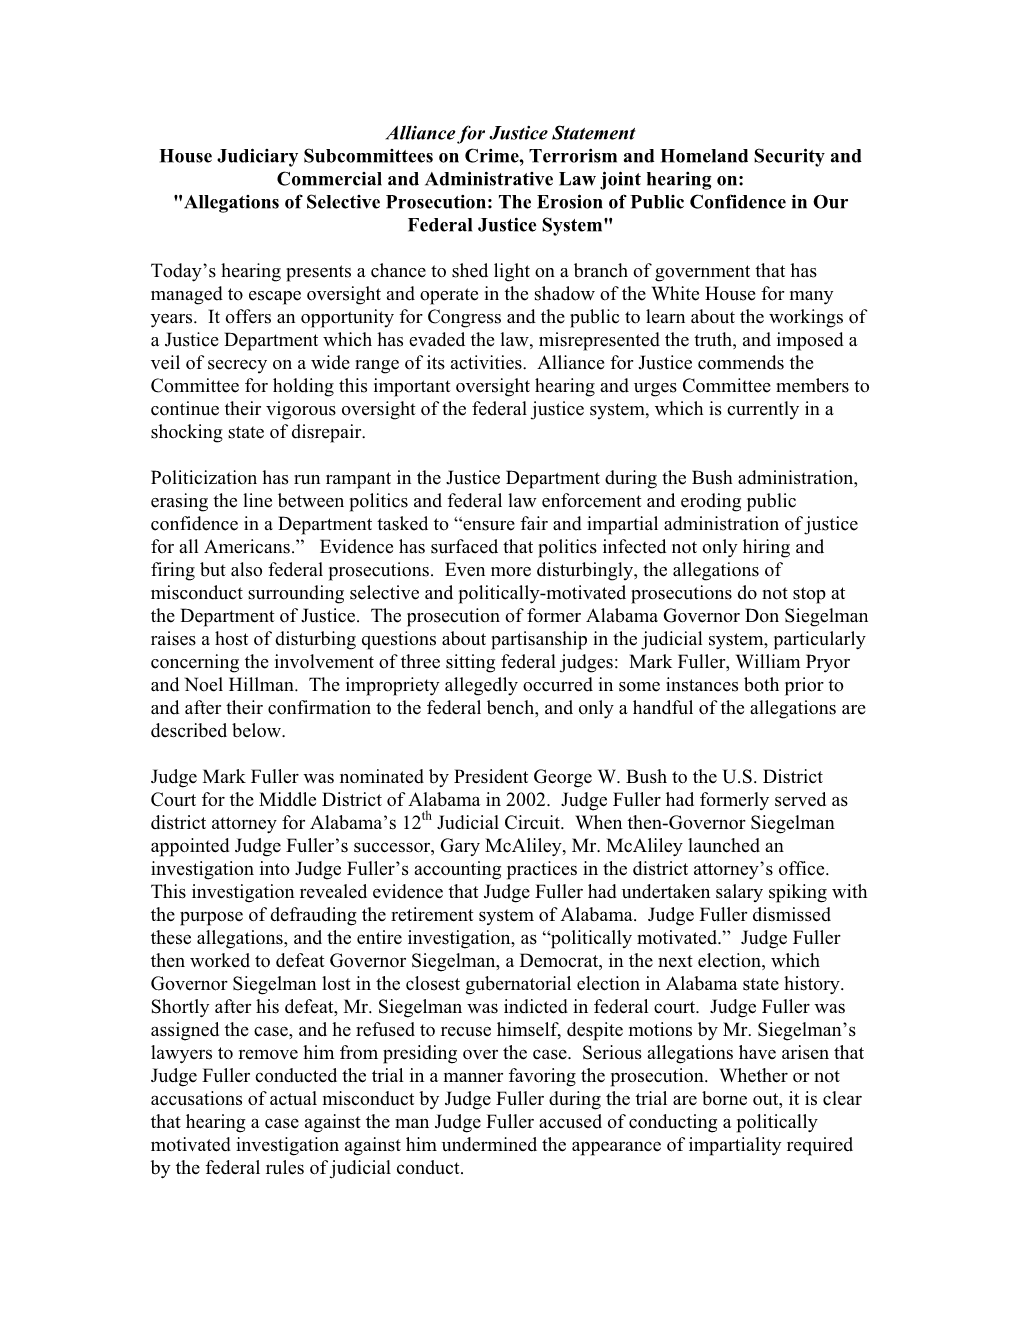 Alliance for Justice Statement House Judiciary Subcommittees on Crime, Terrorism and Homeland Security and Commercial and Admin